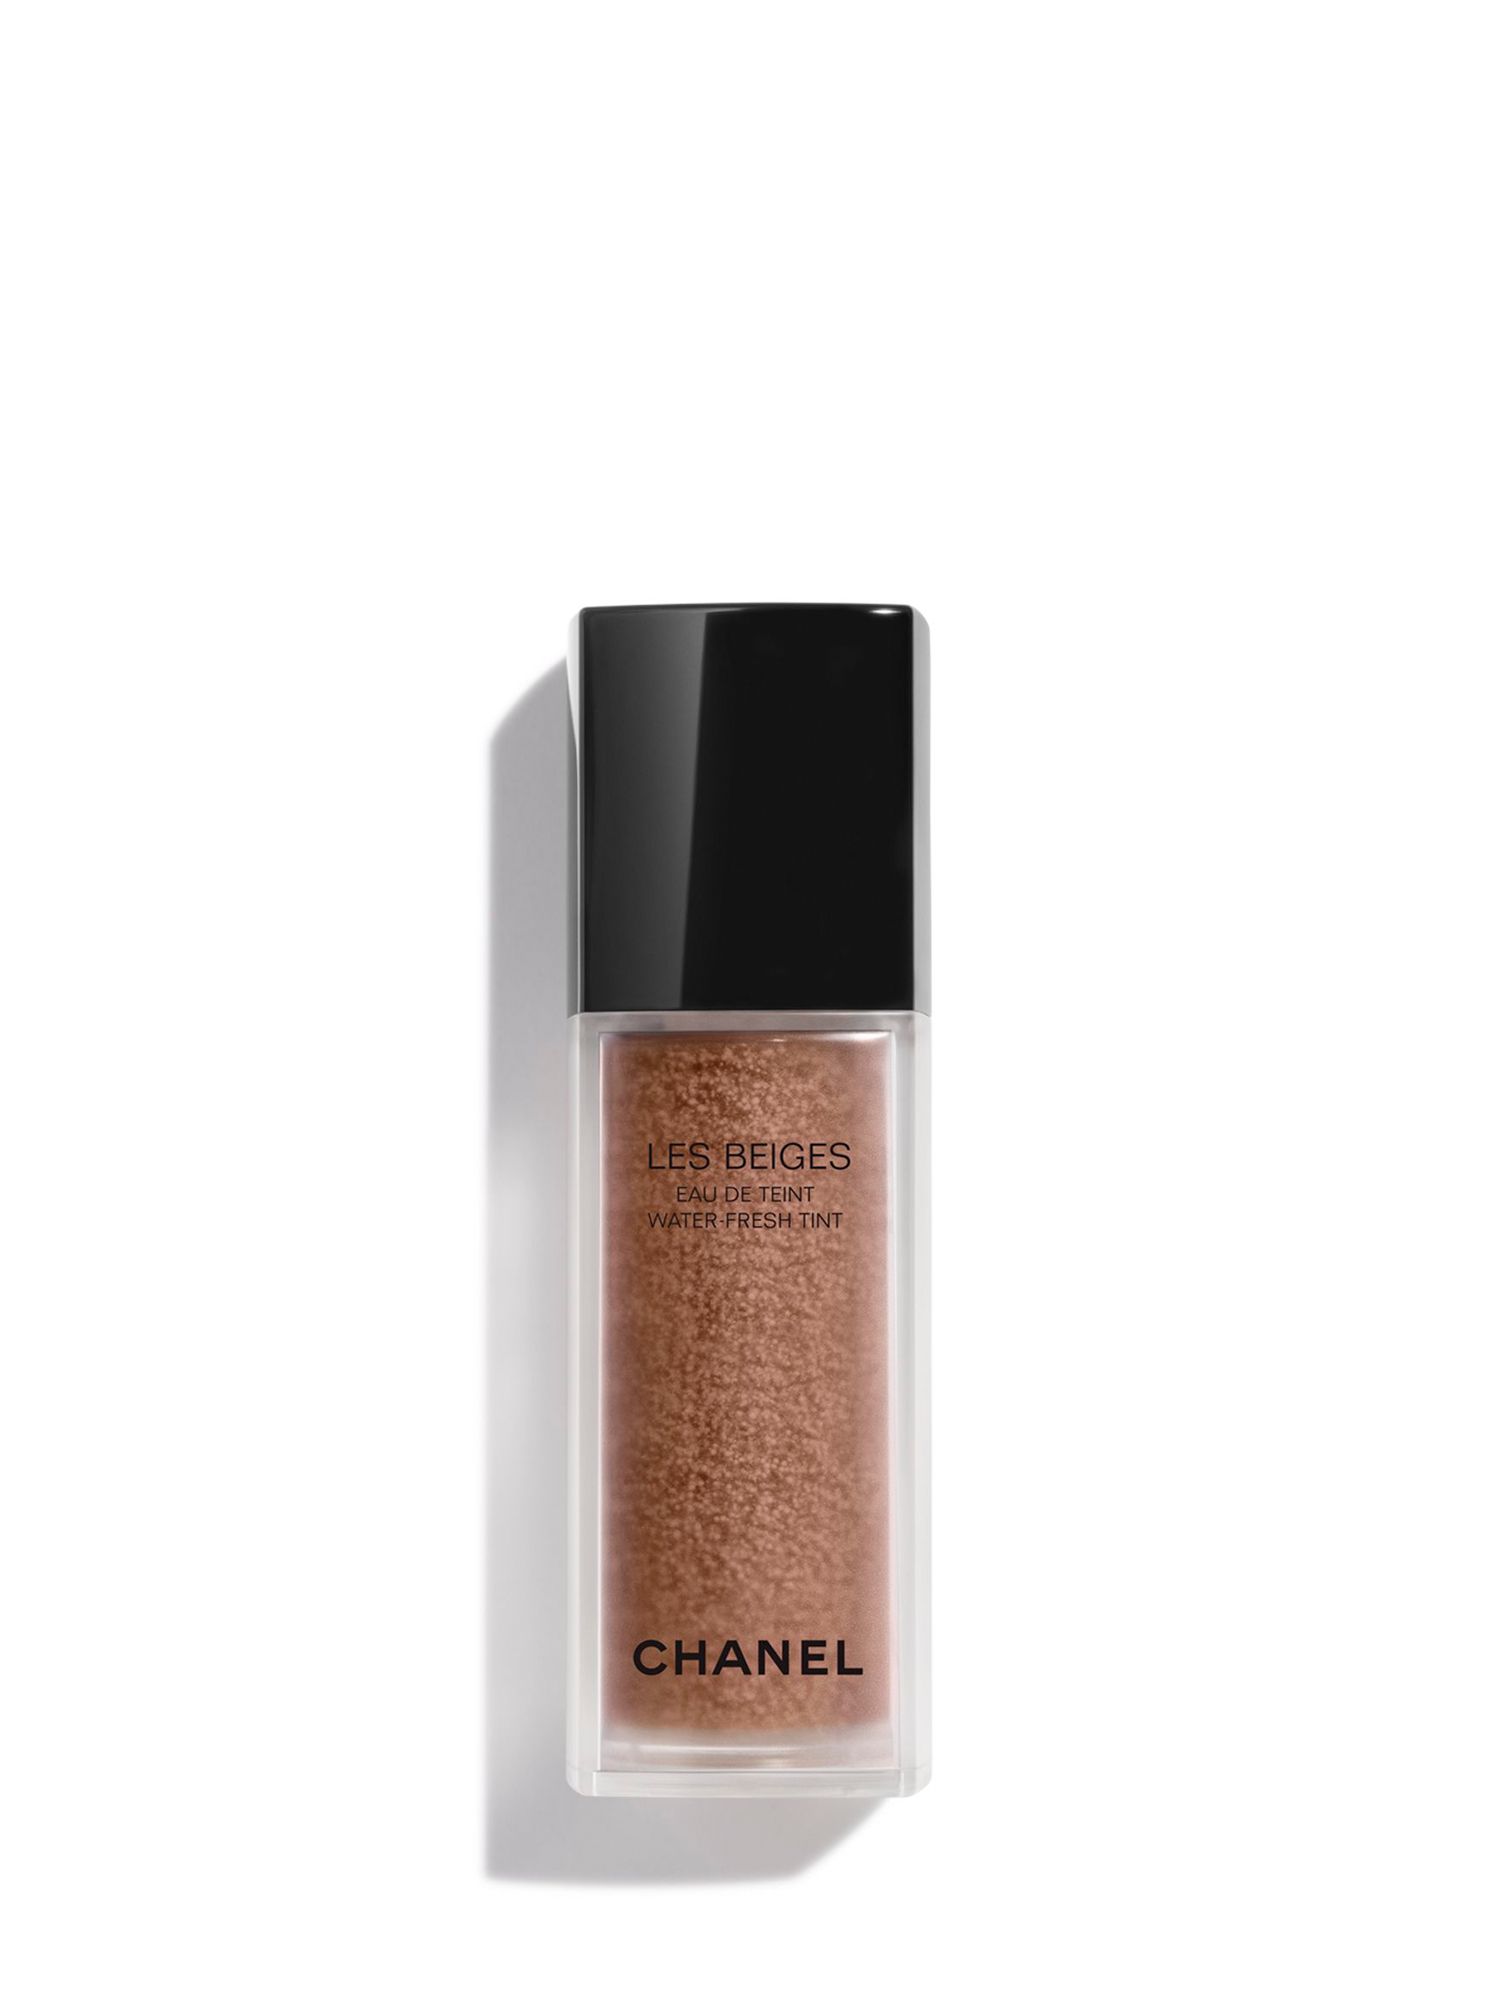 chanel les beiges water fresh tint deep